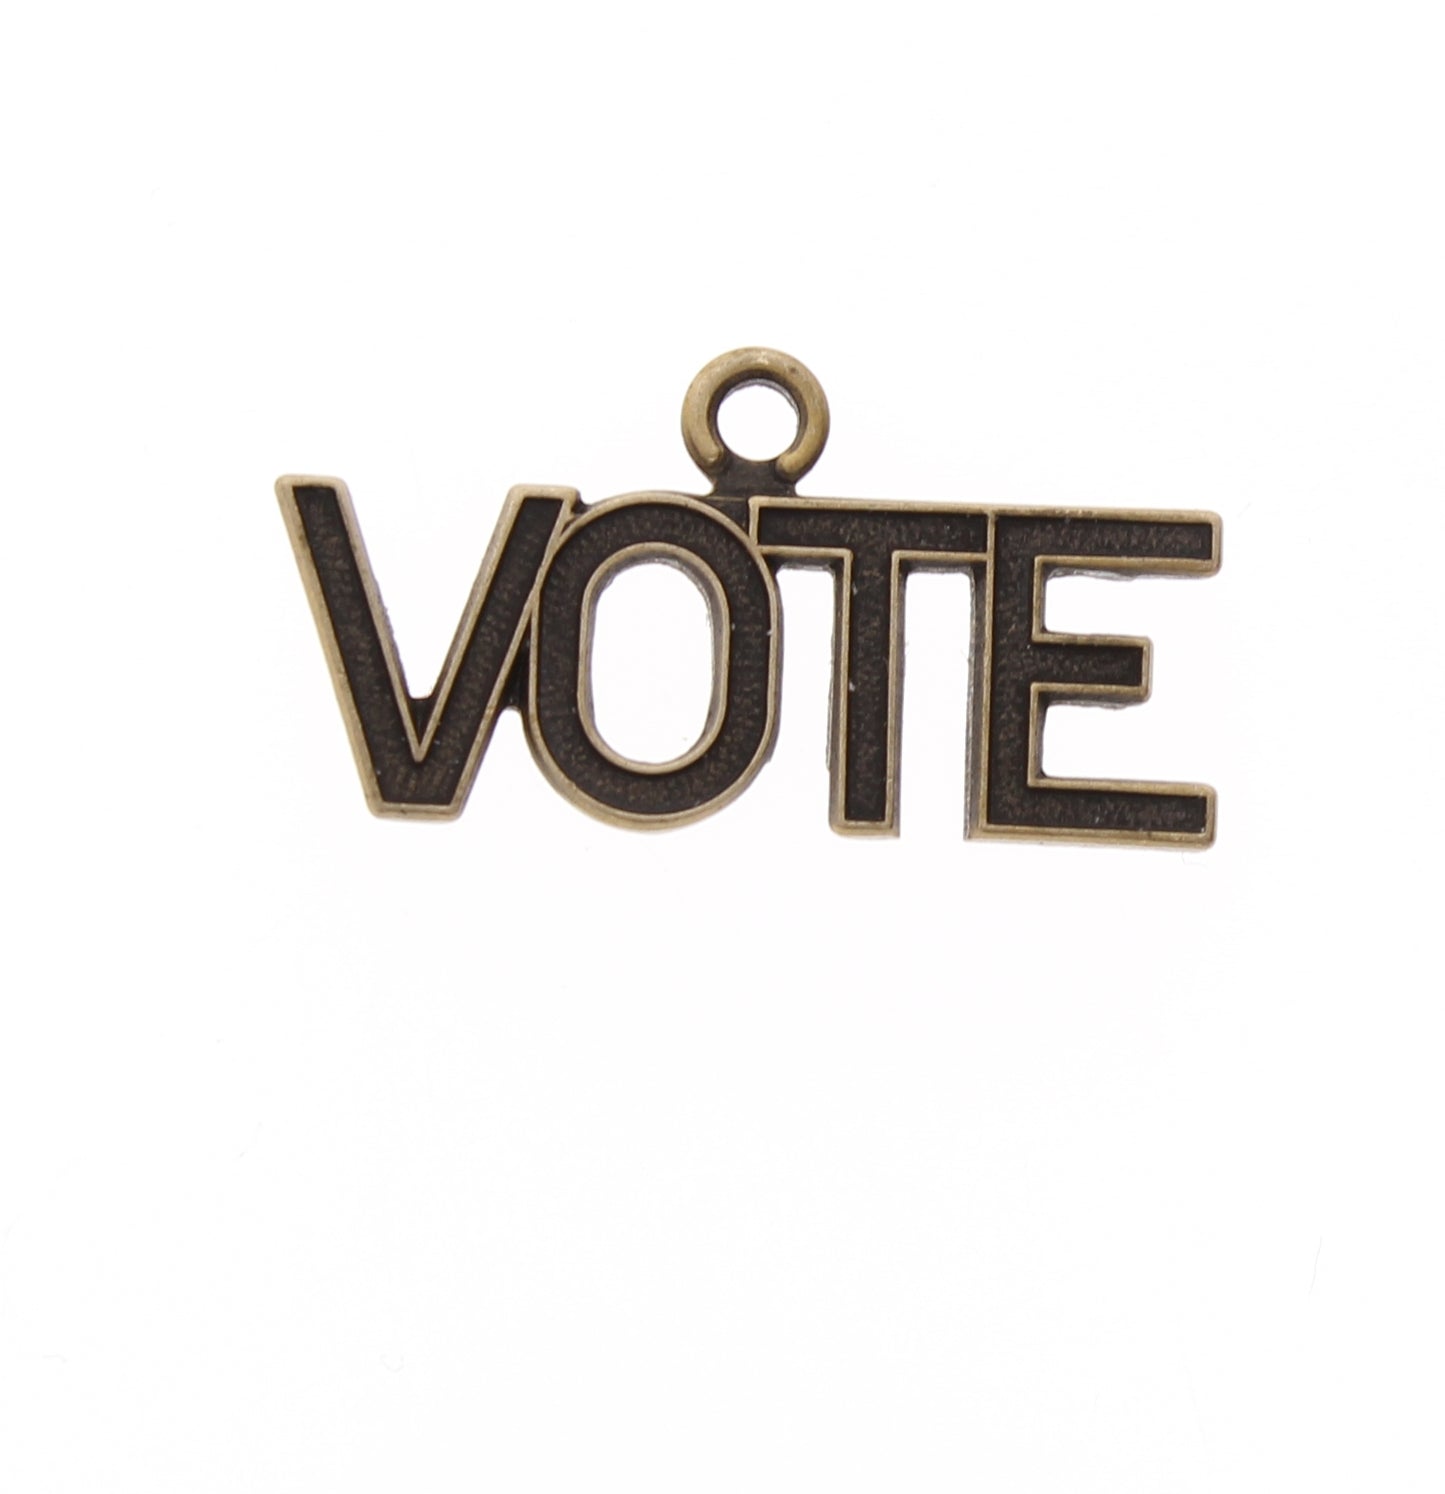 Vote Charm brass , made in USA with ring antique gold, 6 each